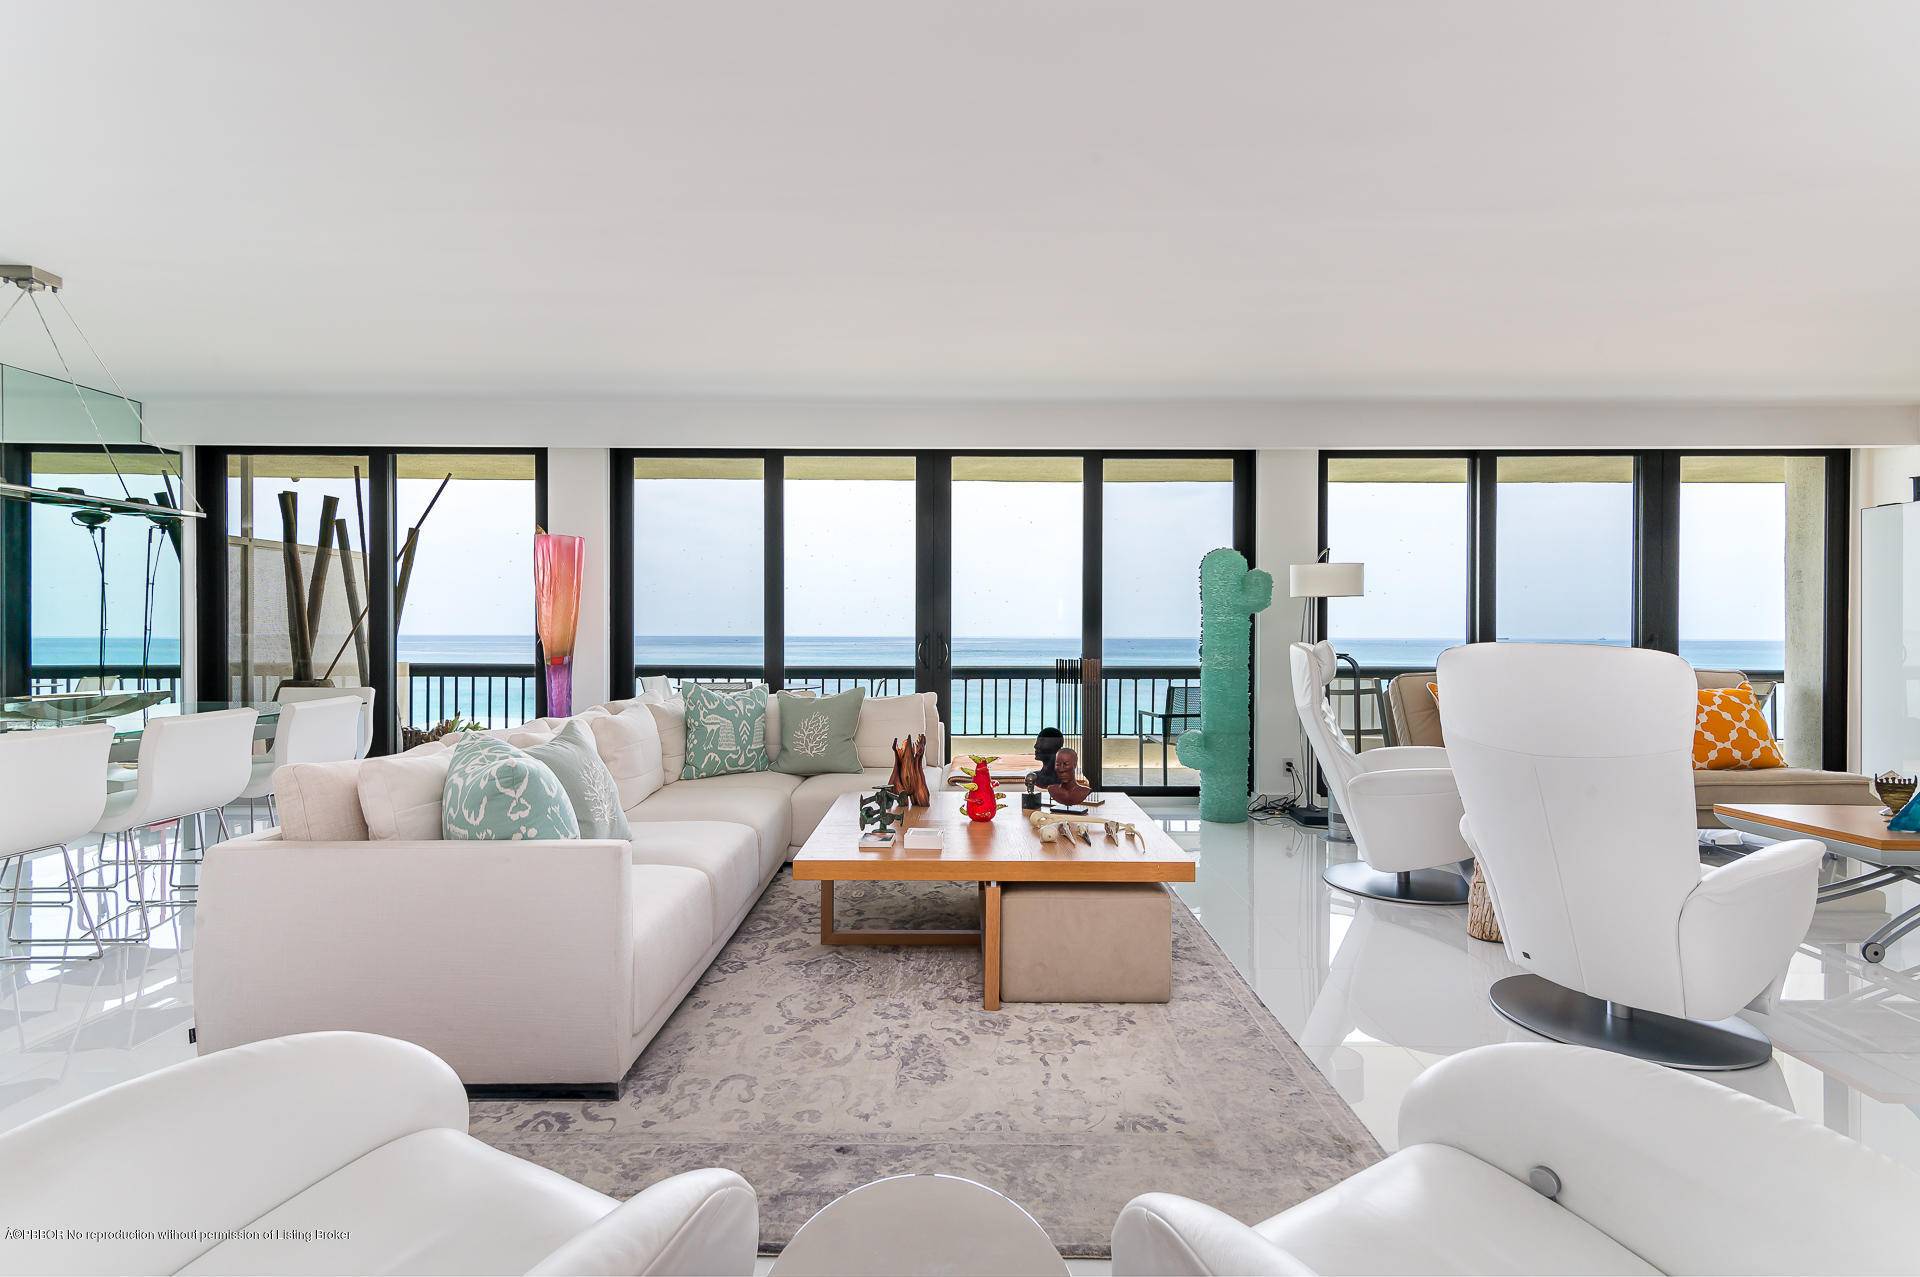 Spectacular Direct Ocean views can be seen from all rooms in this desirable Beach Point condominium.